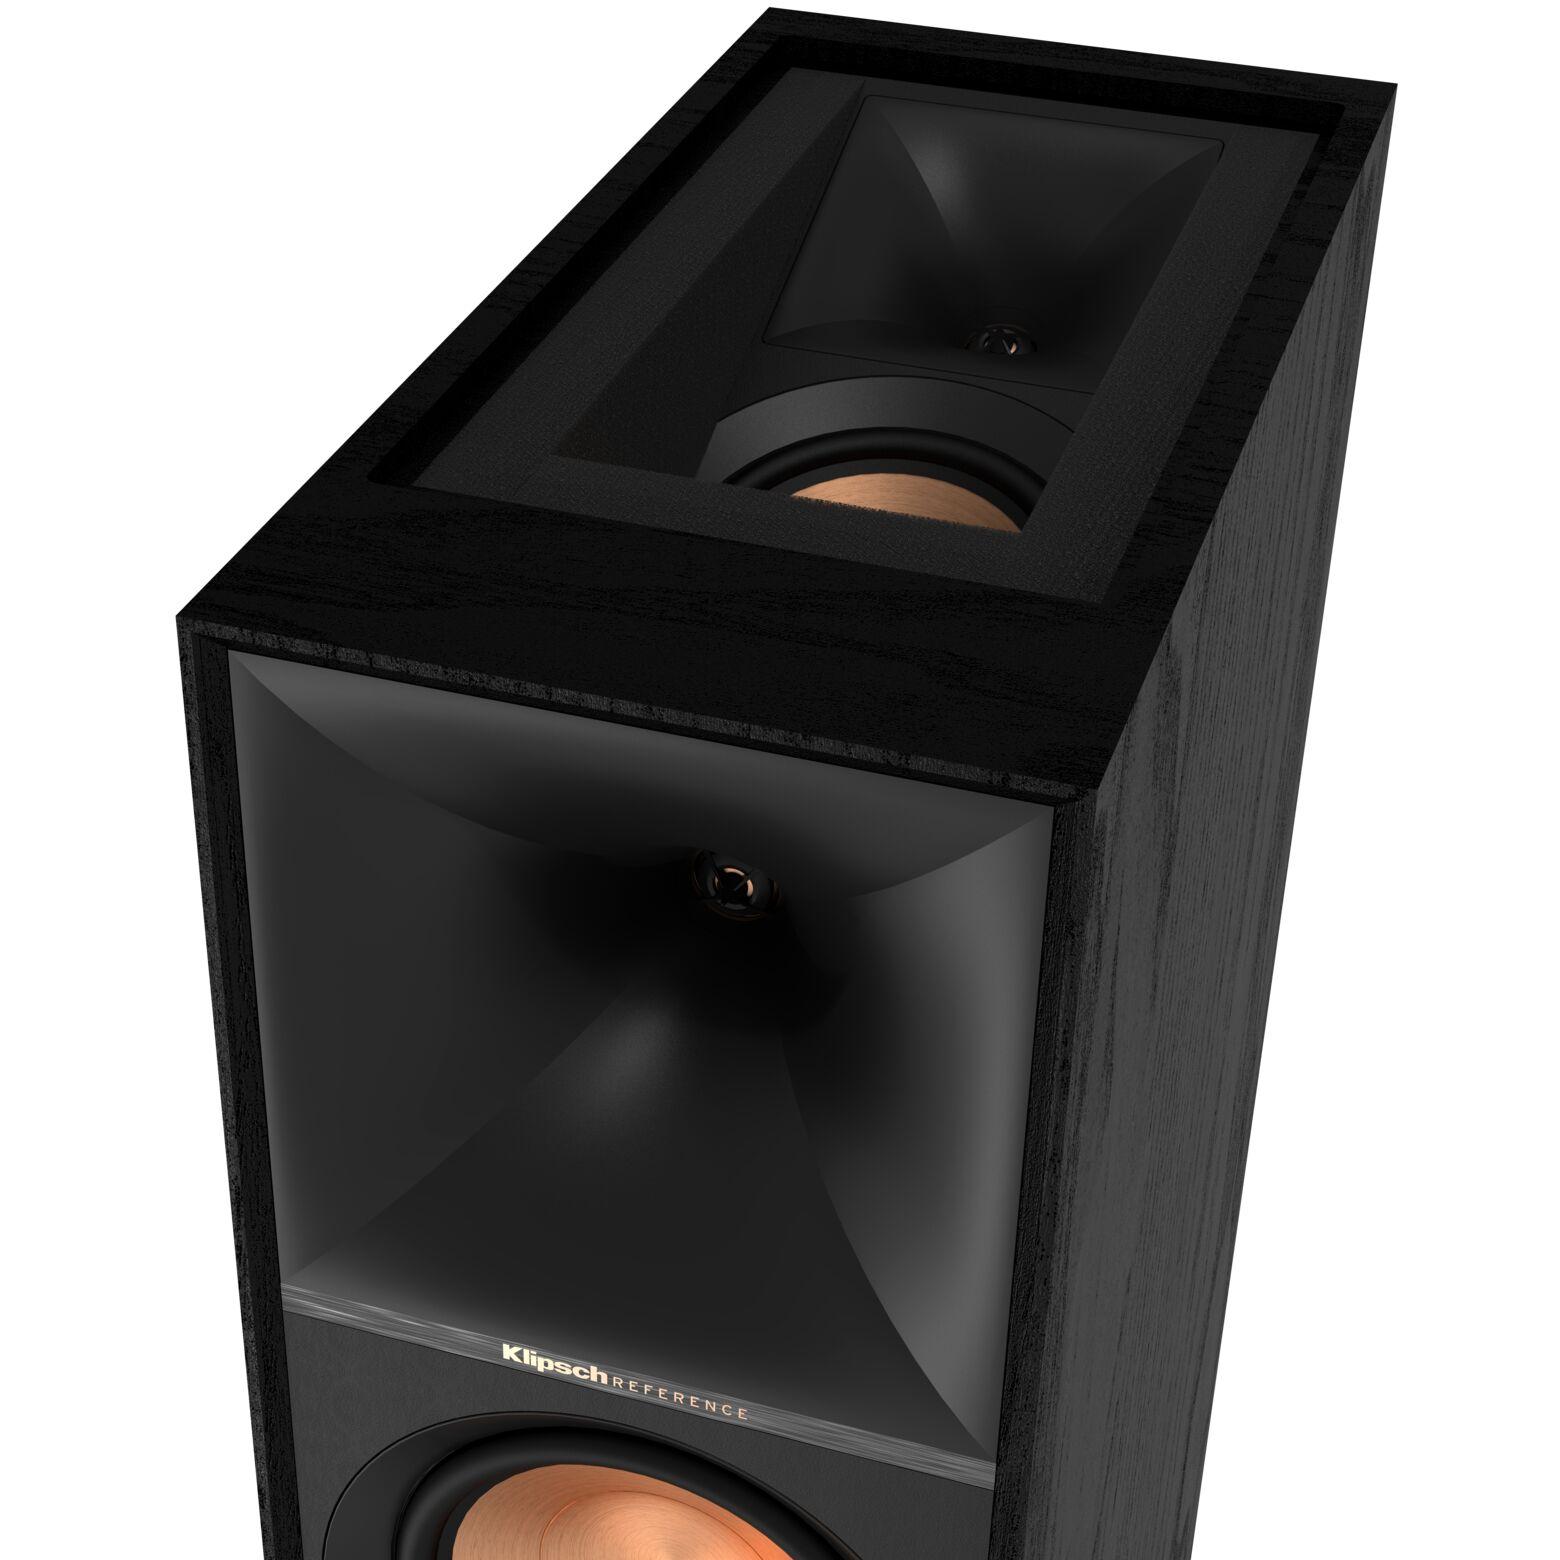 Klipsch goes all-out with a major update of its two most popular speaker lines a74b7e50 web ready reference r 605fa horn